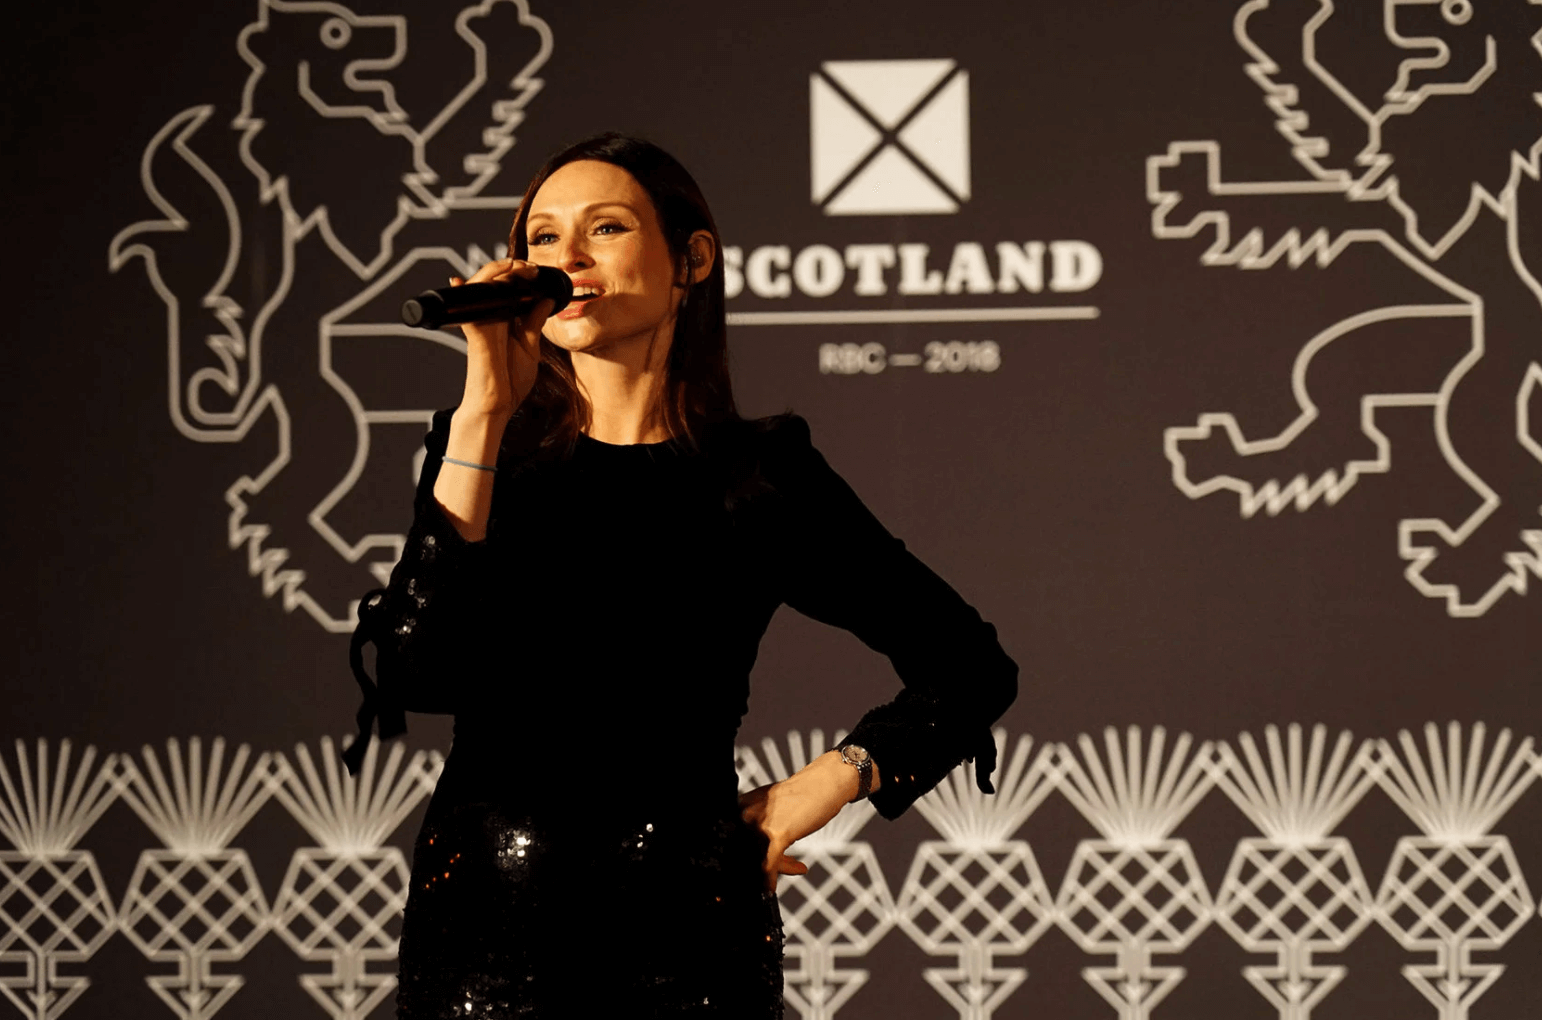 Lady on Mic in Scotland'